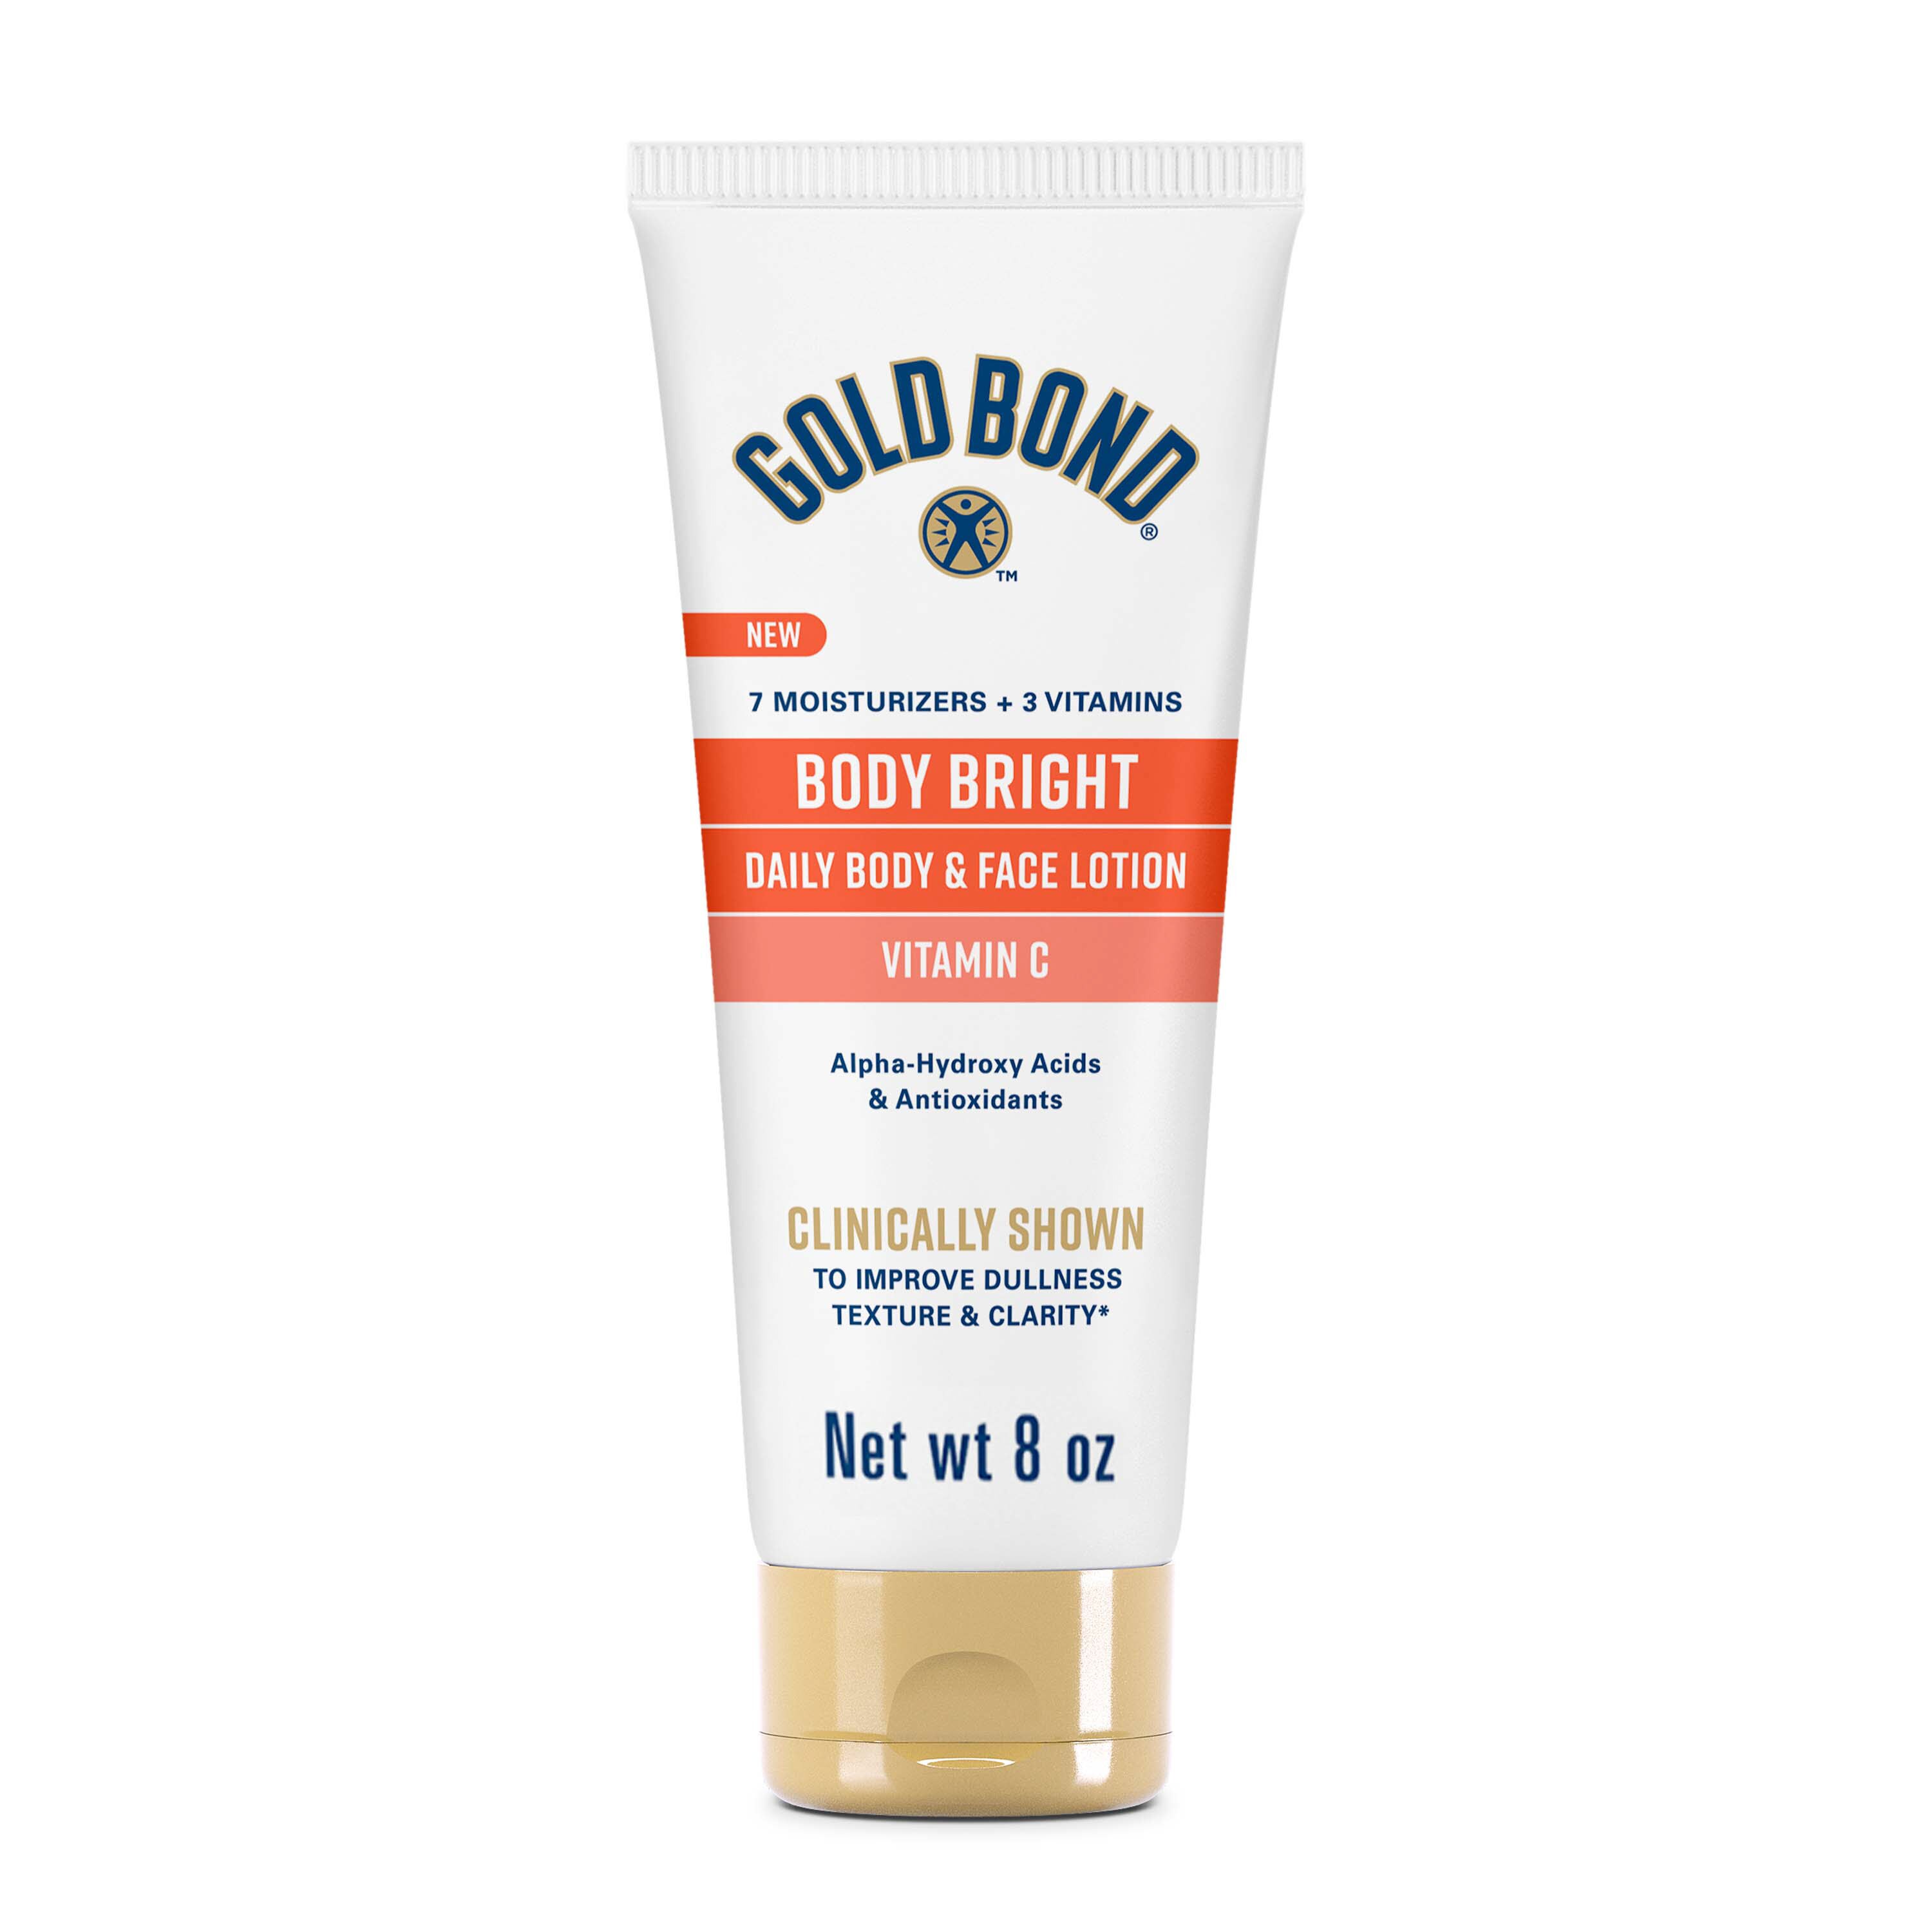 Gold Bond Body Bright Daily Body & Face Lotion With Vitamin C, 8 OZ